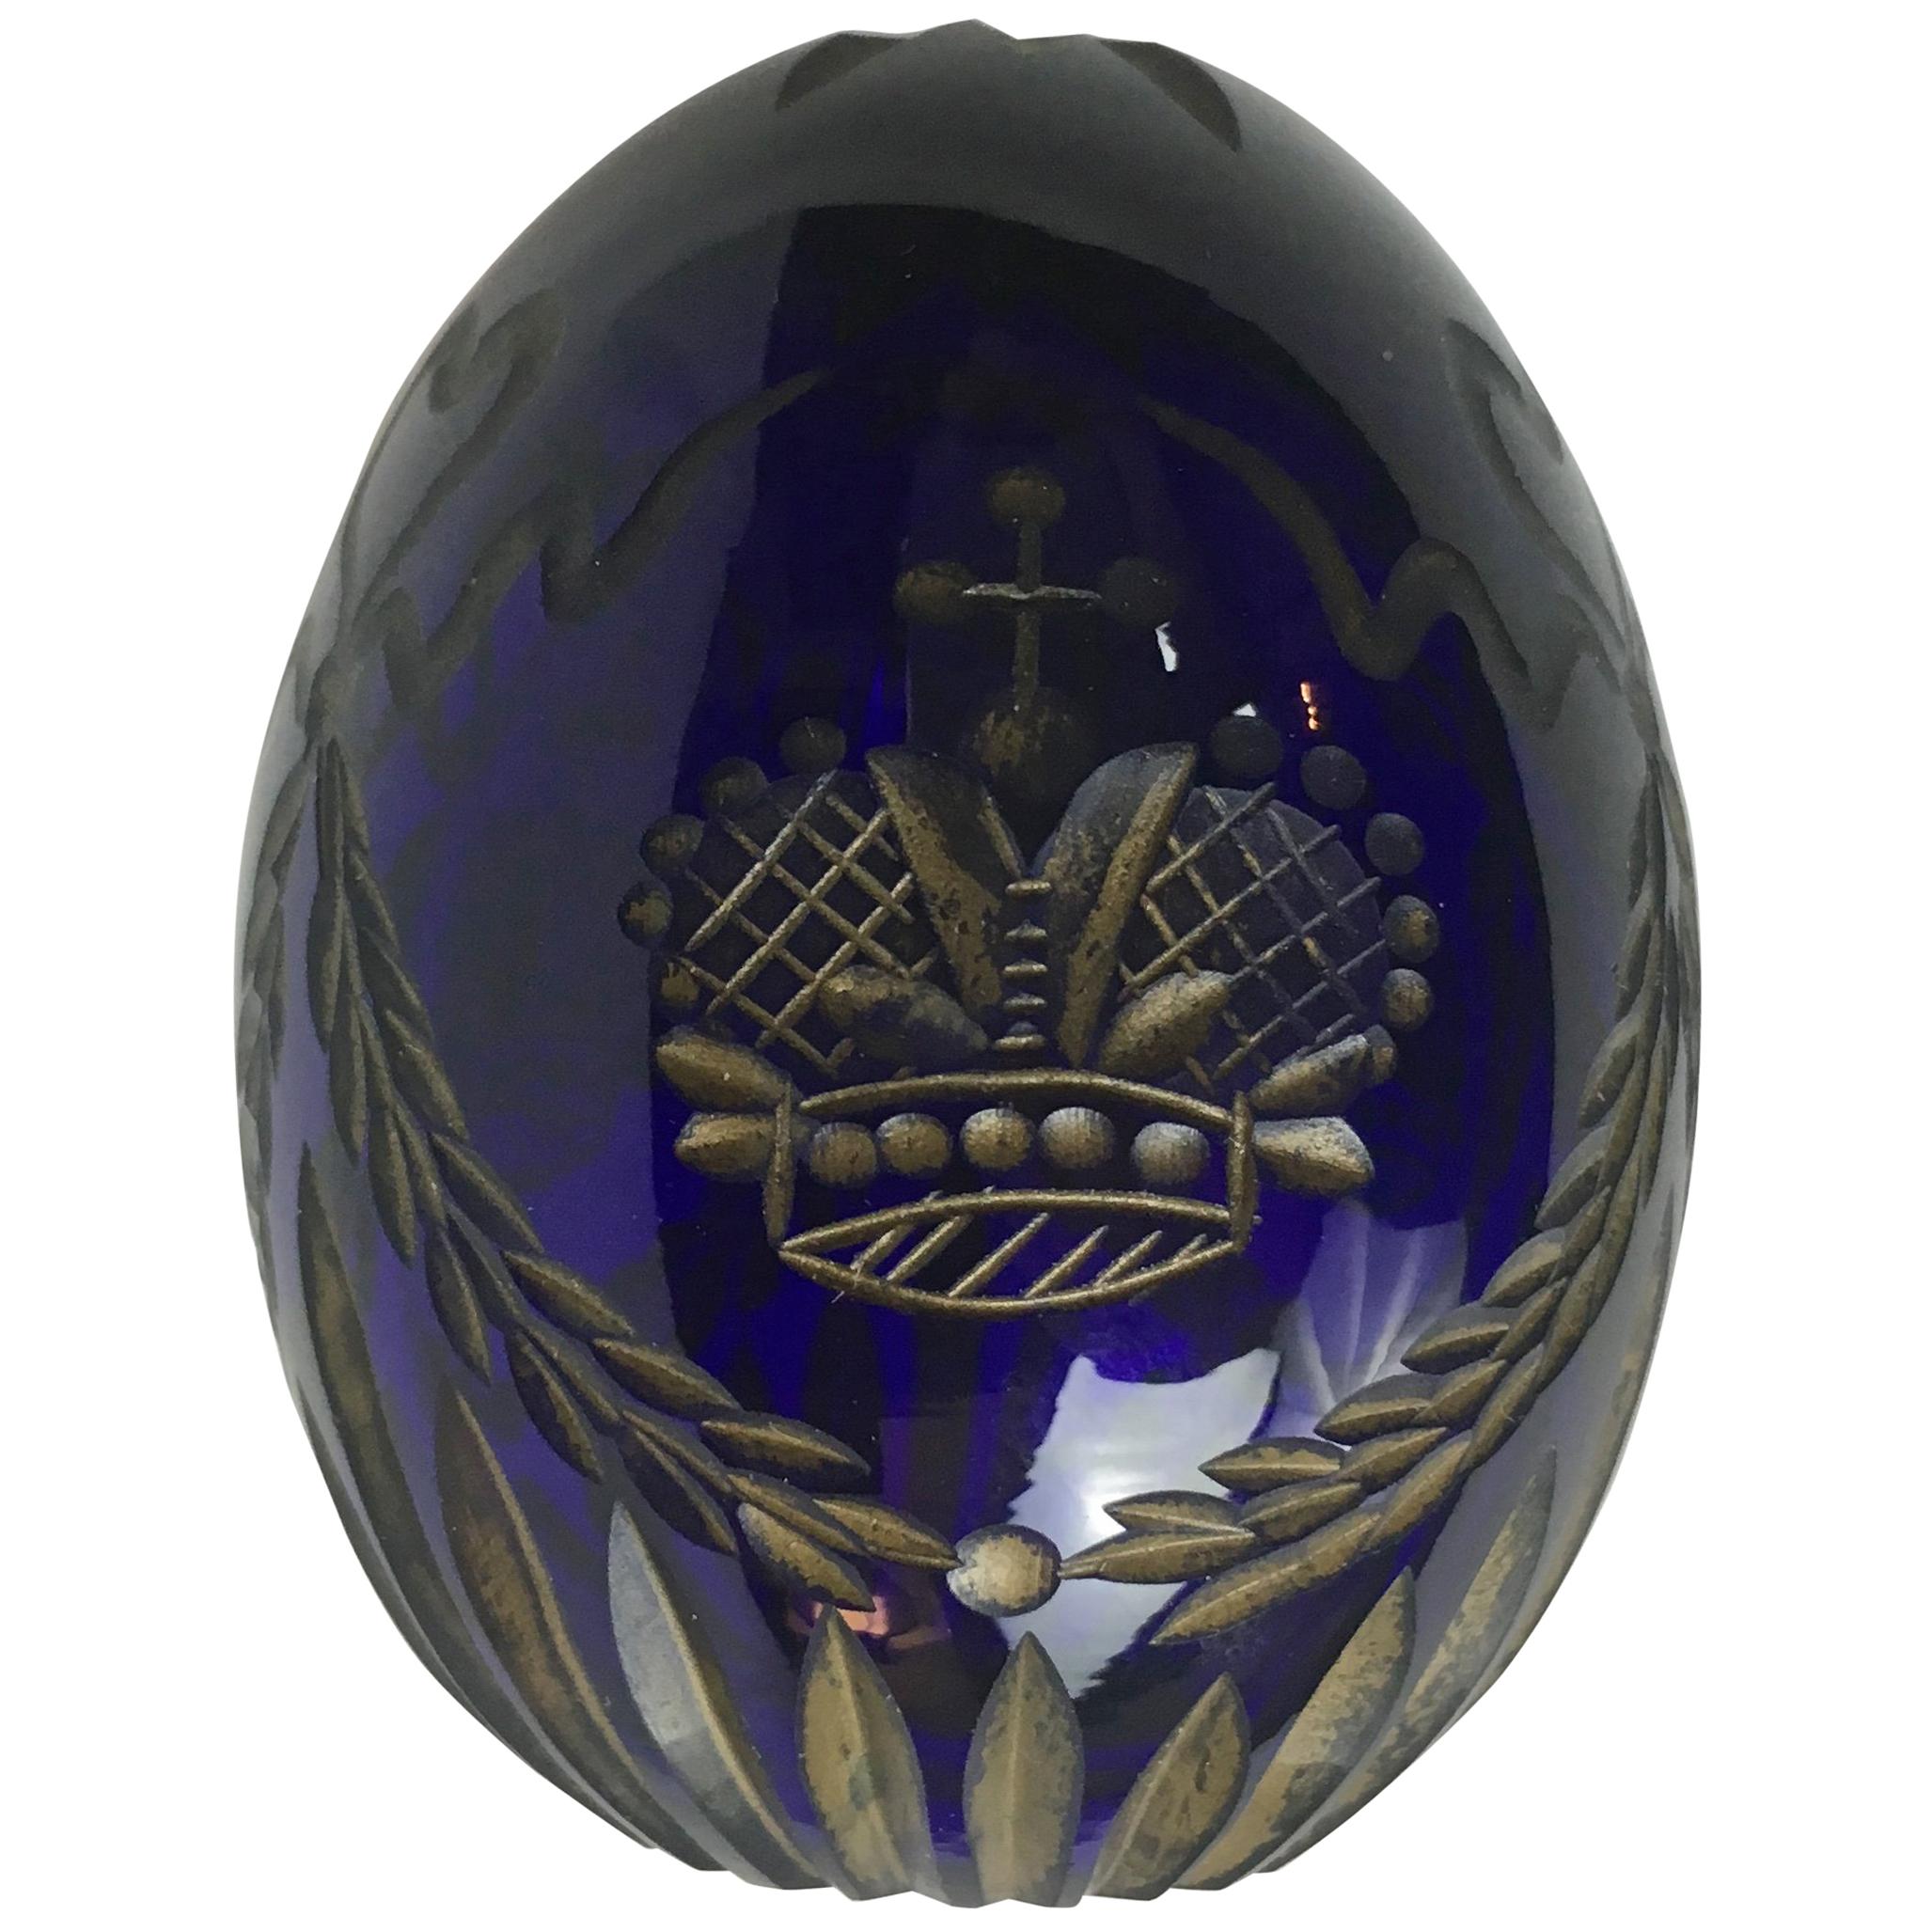 Vintage Faberge Style Glass Egg with Etched Royal Crown